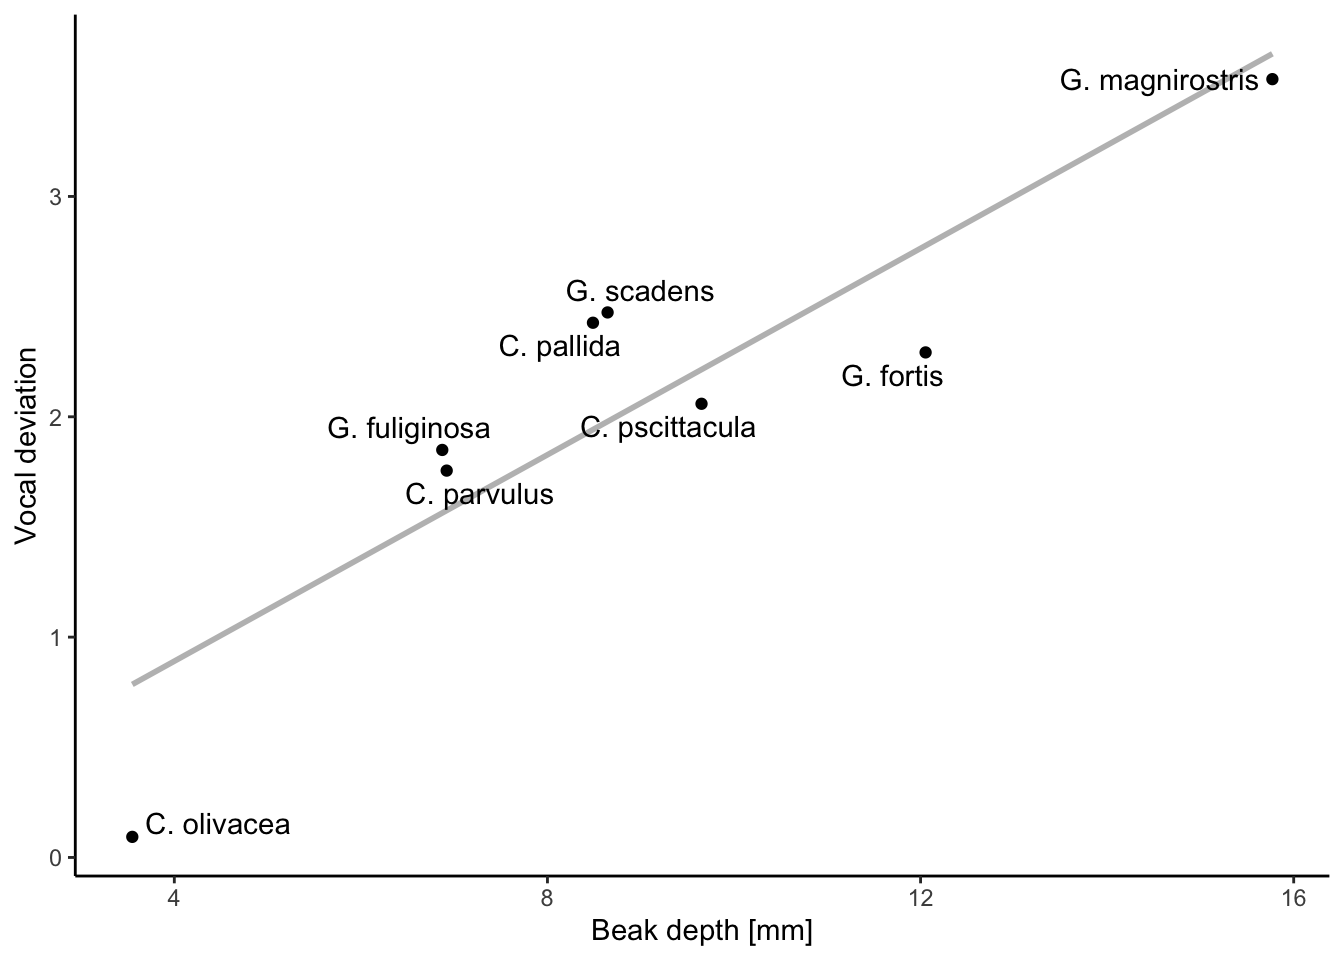 Beak size evolution in Darwin's finches in correlated with song complexity, as measured by vocal deviation. Higher vocal deviation in this case corresponds to lower song complexity. [Data](data/11_beaksound.csv) from Podos (2001).